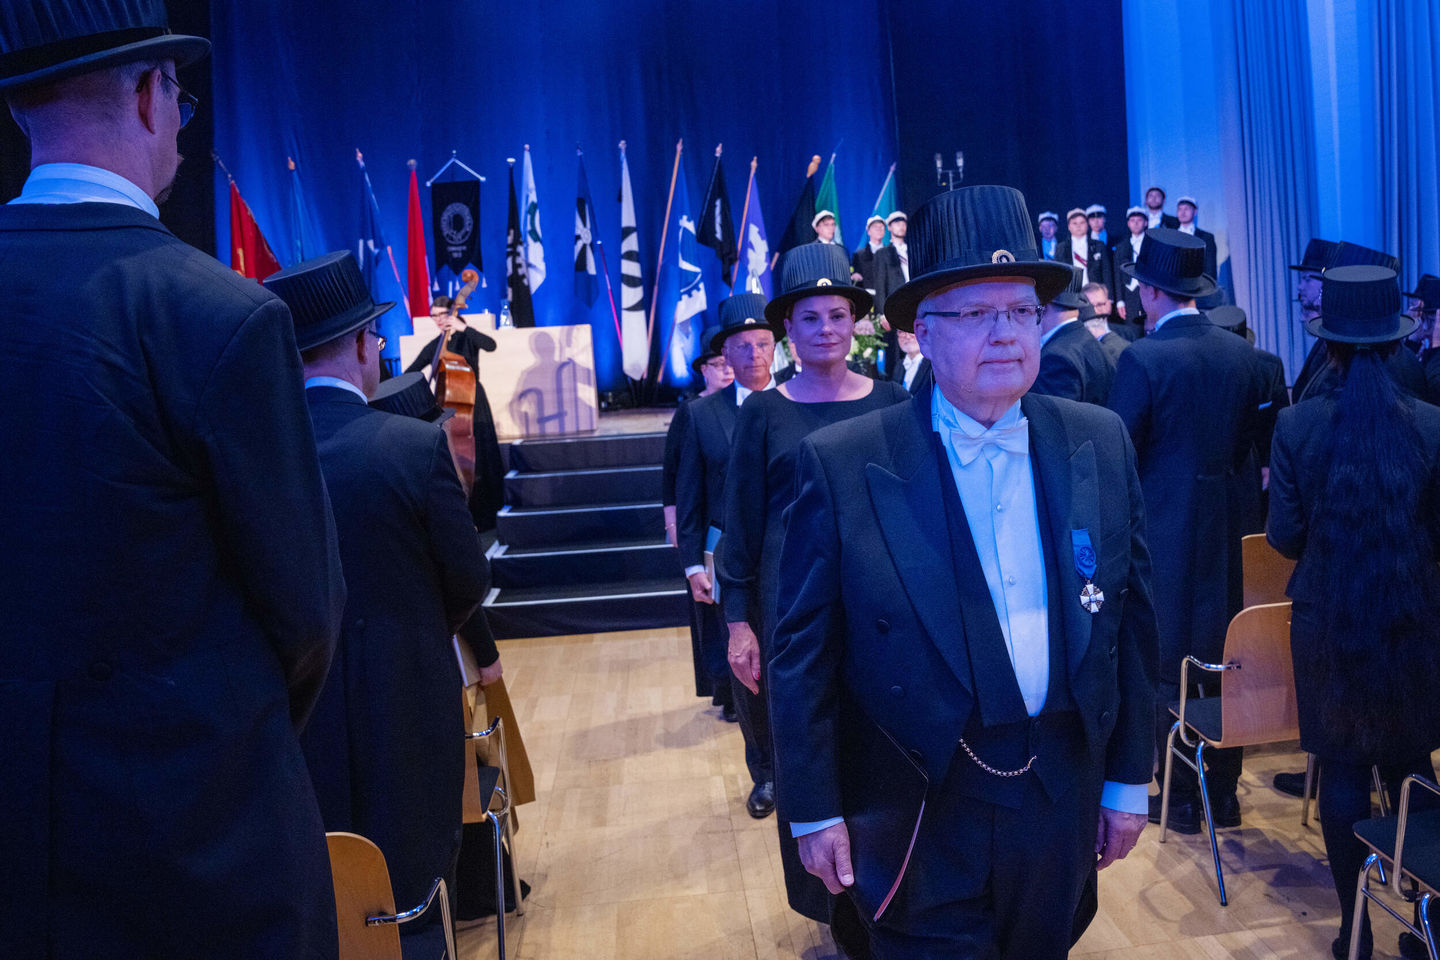 Procession exiting Kaleva: conferrer Pter Lund followed by honorary doctors